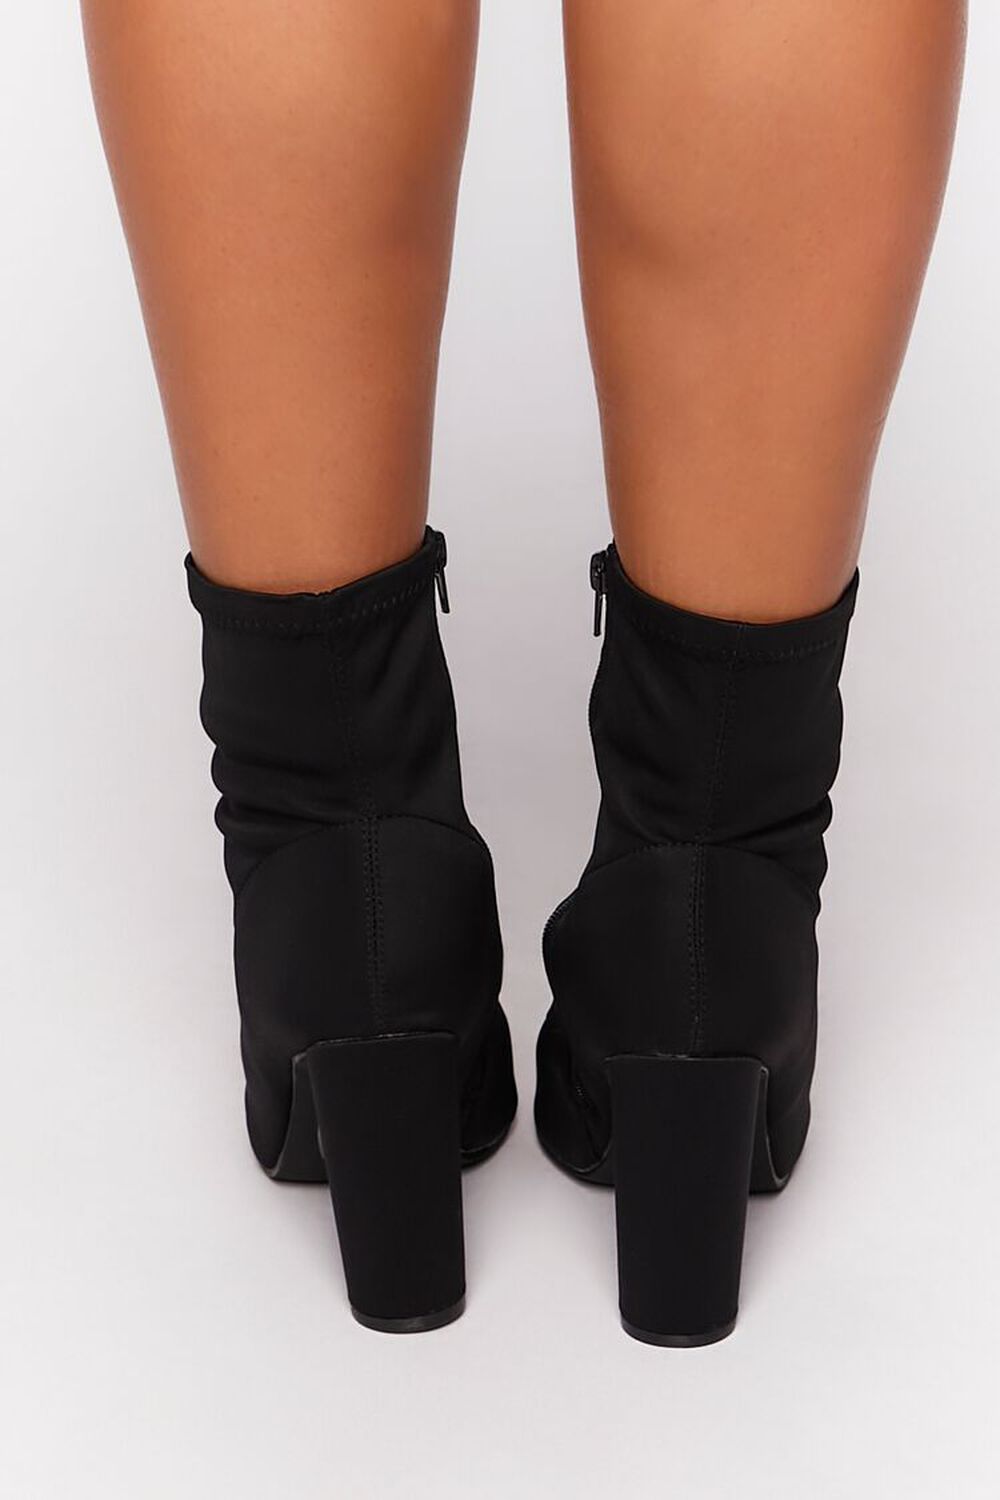 BLACK Pointed Toe Ankle Boots (Wide), image 3